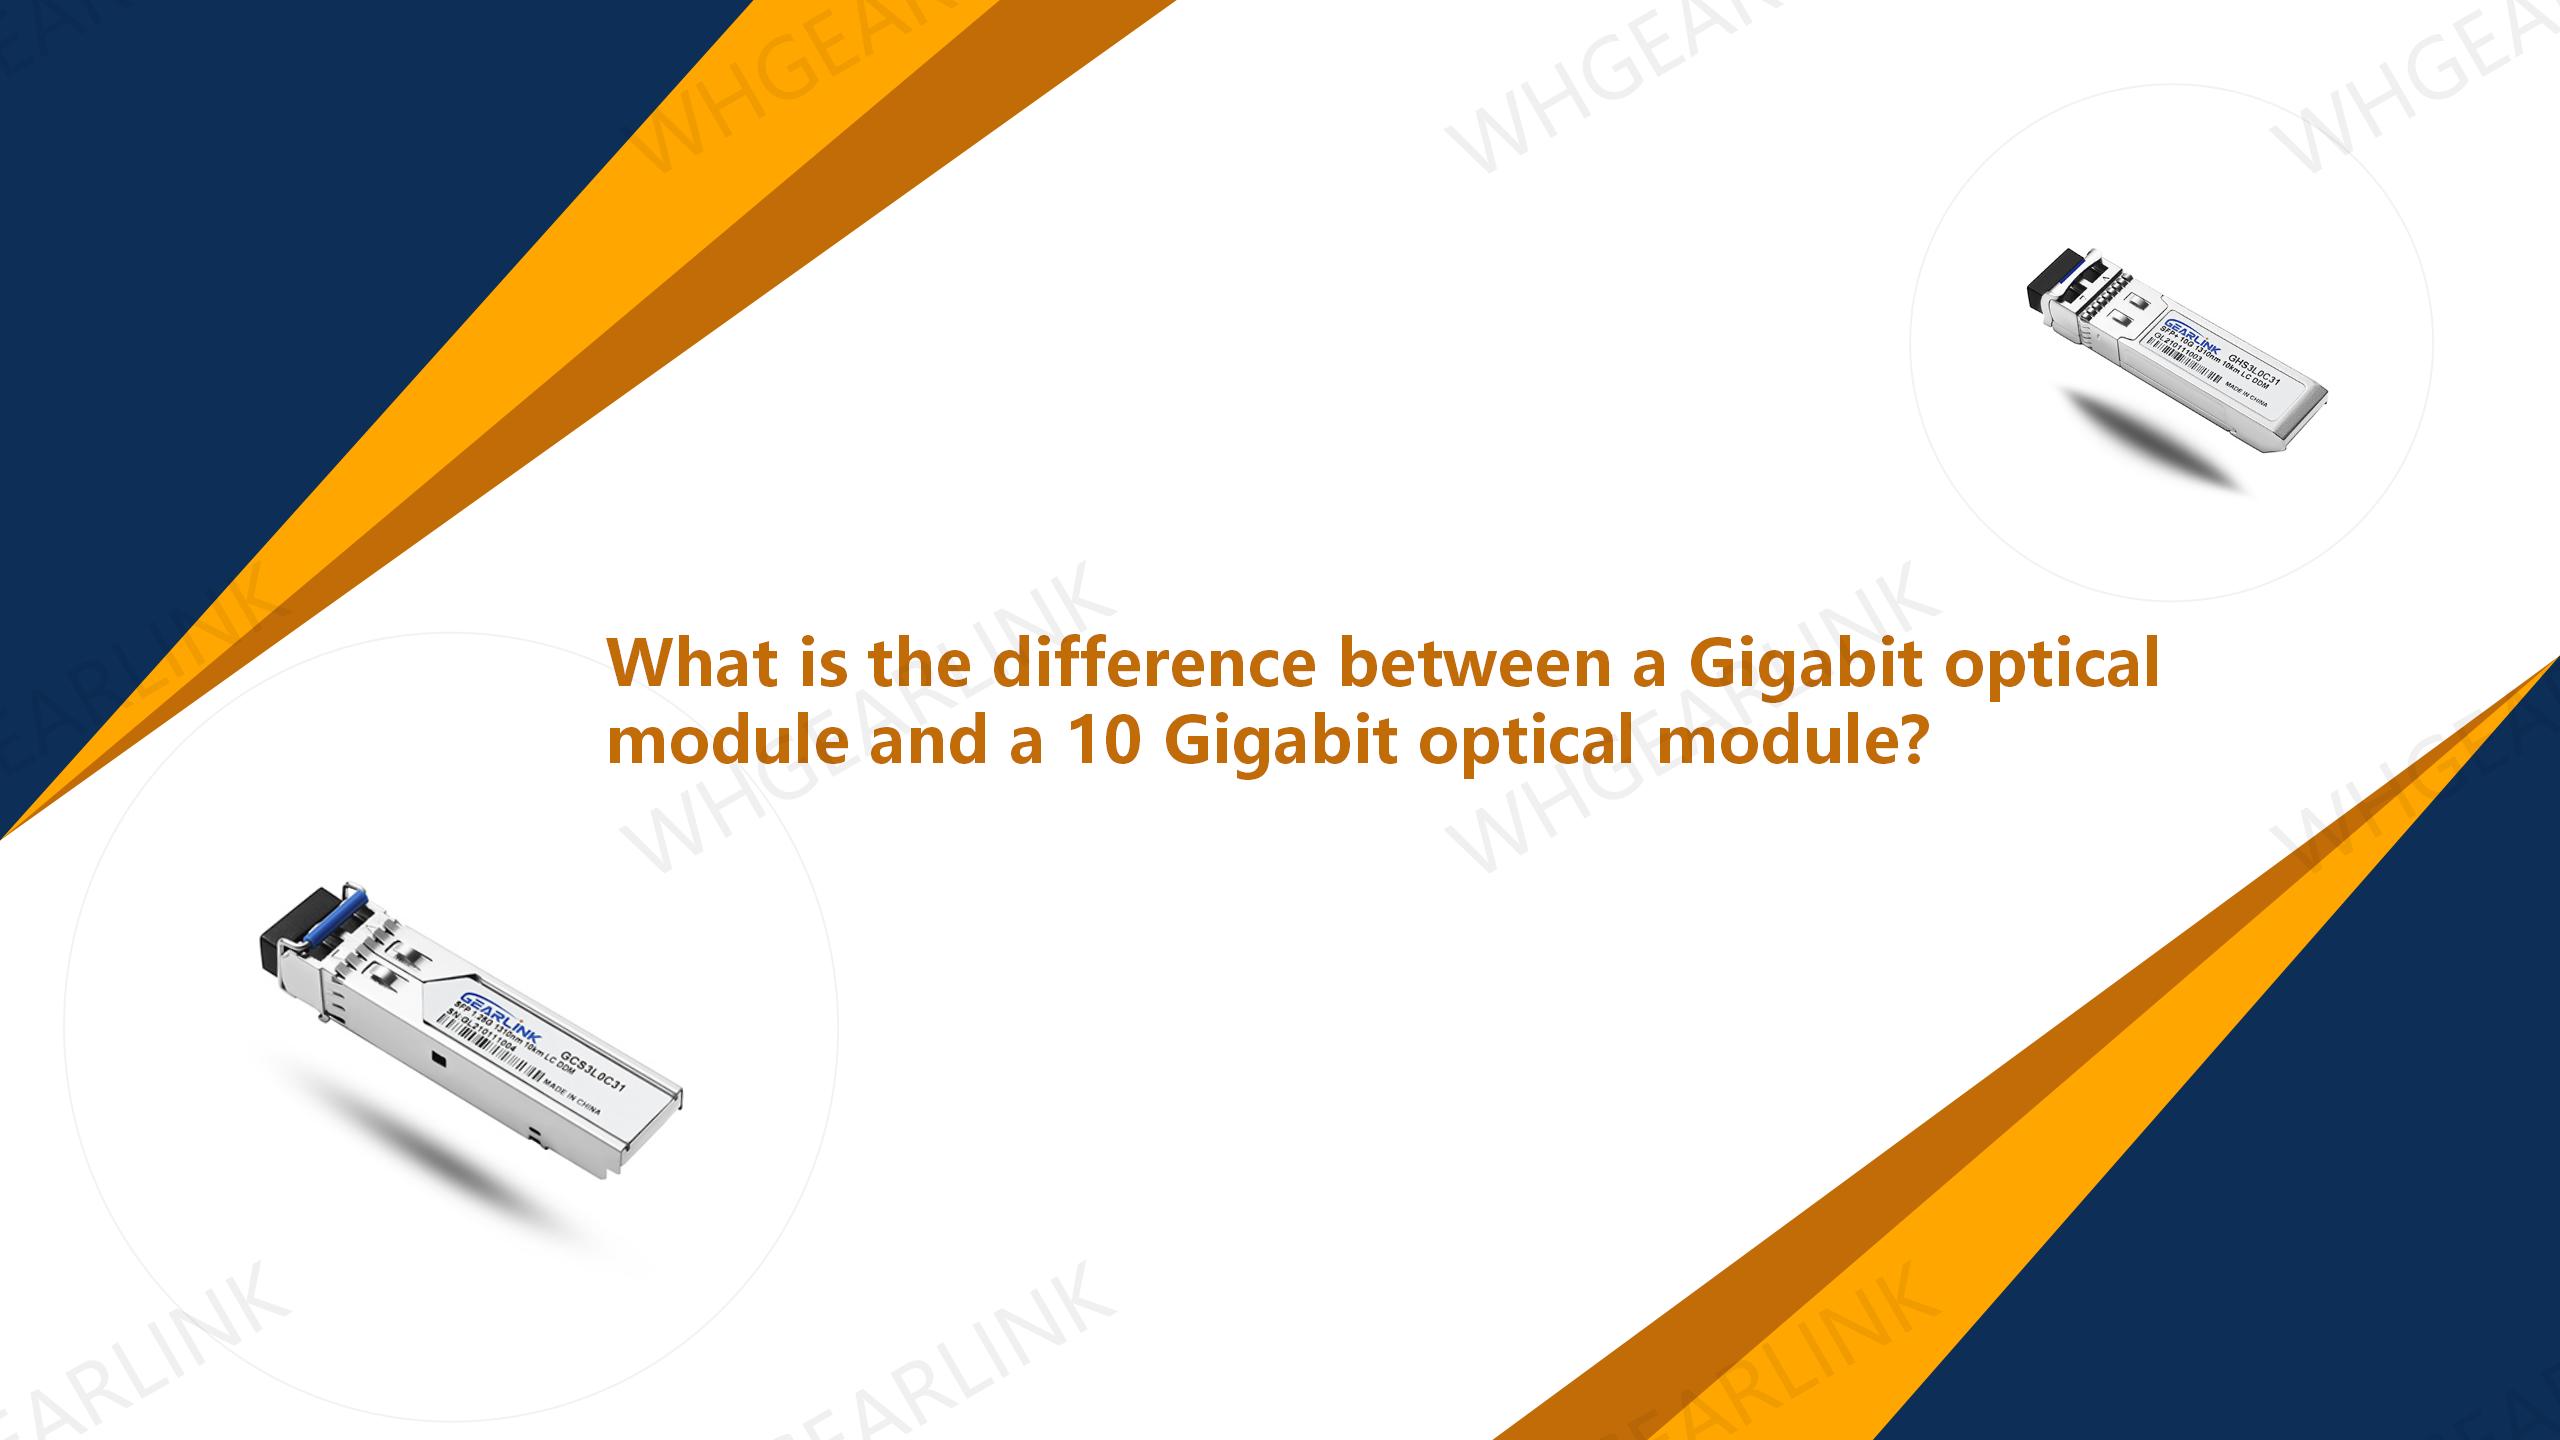 What is the difference between a Gigabit optical module and a 10 Gigabit optical module?